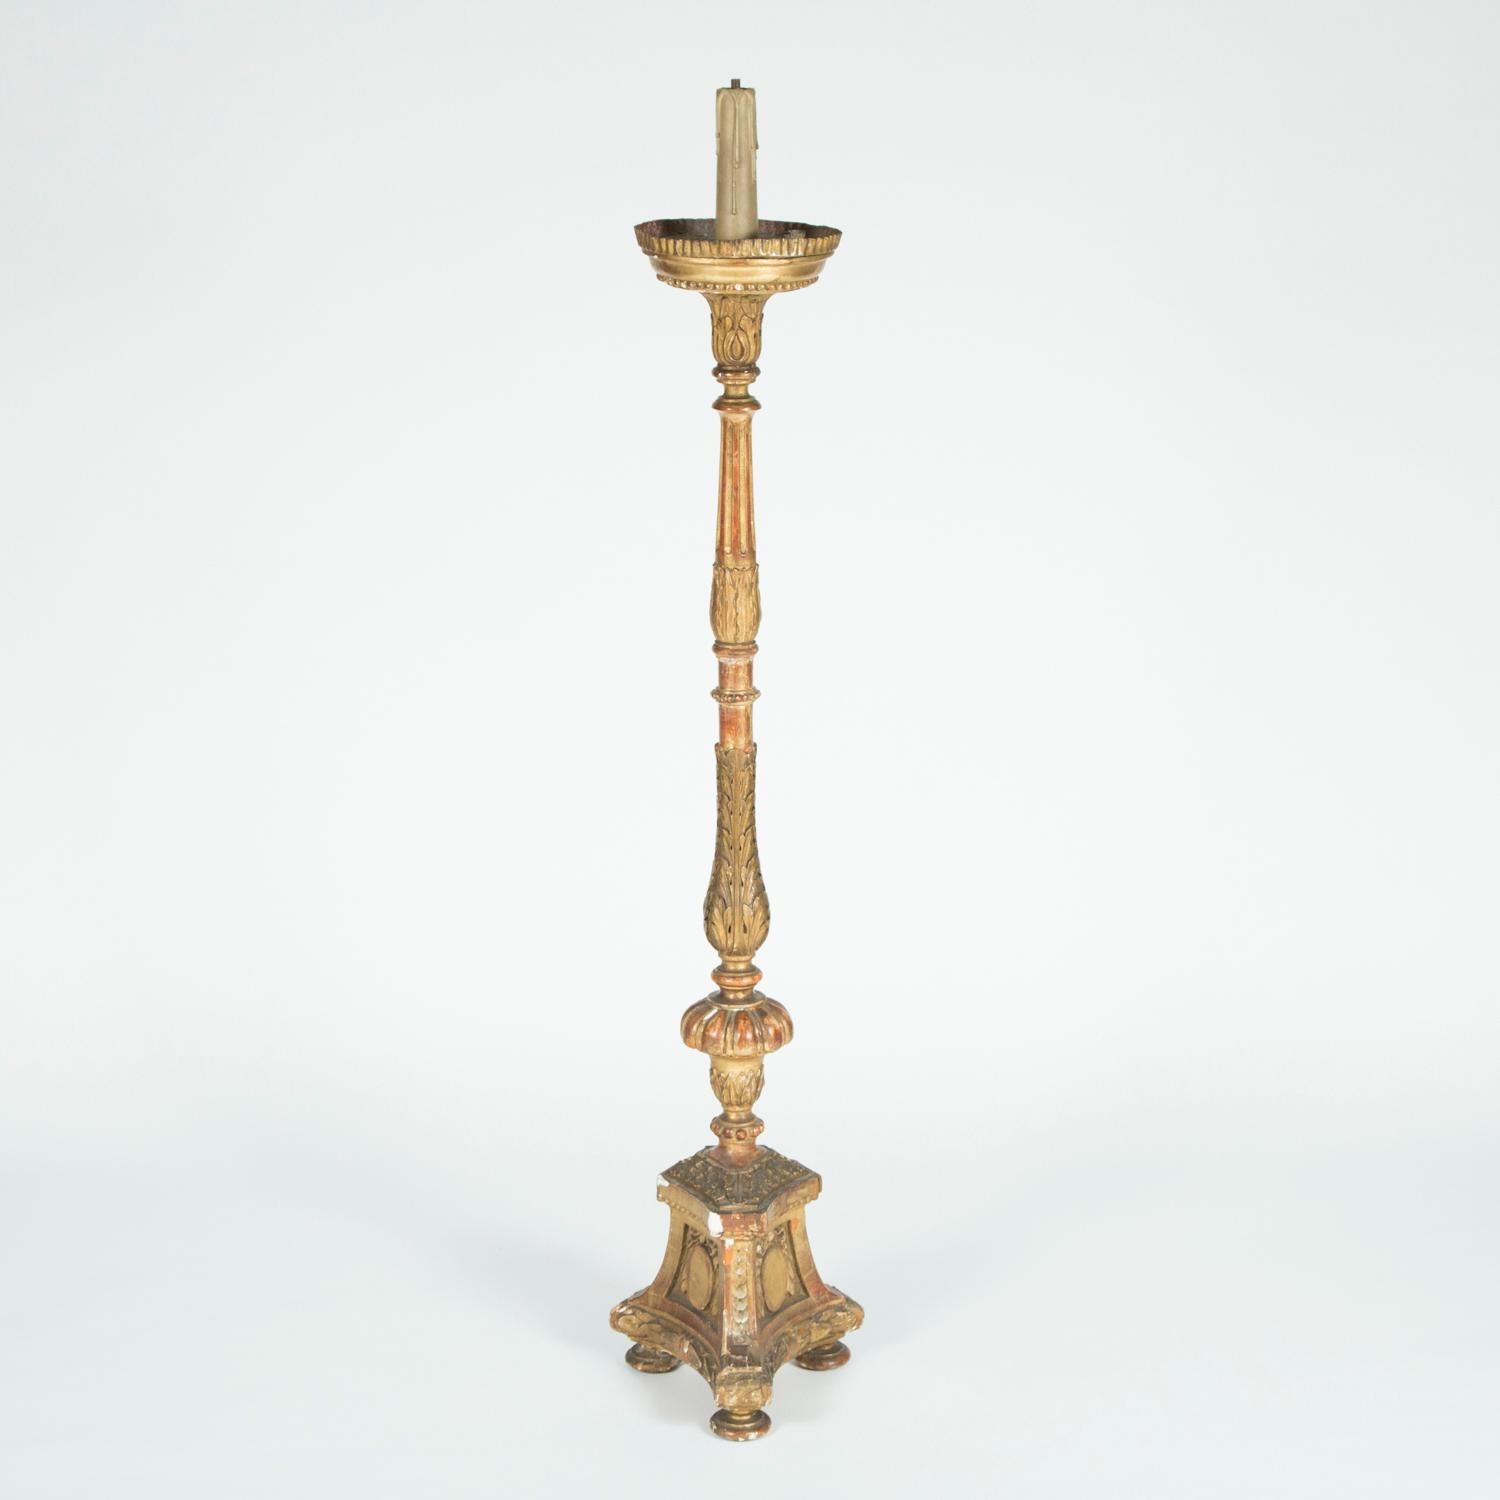 A pair of mid-19th century Italian giltwood candelabra with original gilding, the stems are carved with floral motifs and the triform base has a cartouche to each side. 

The candelabra have been previously wired for electricity, this can be